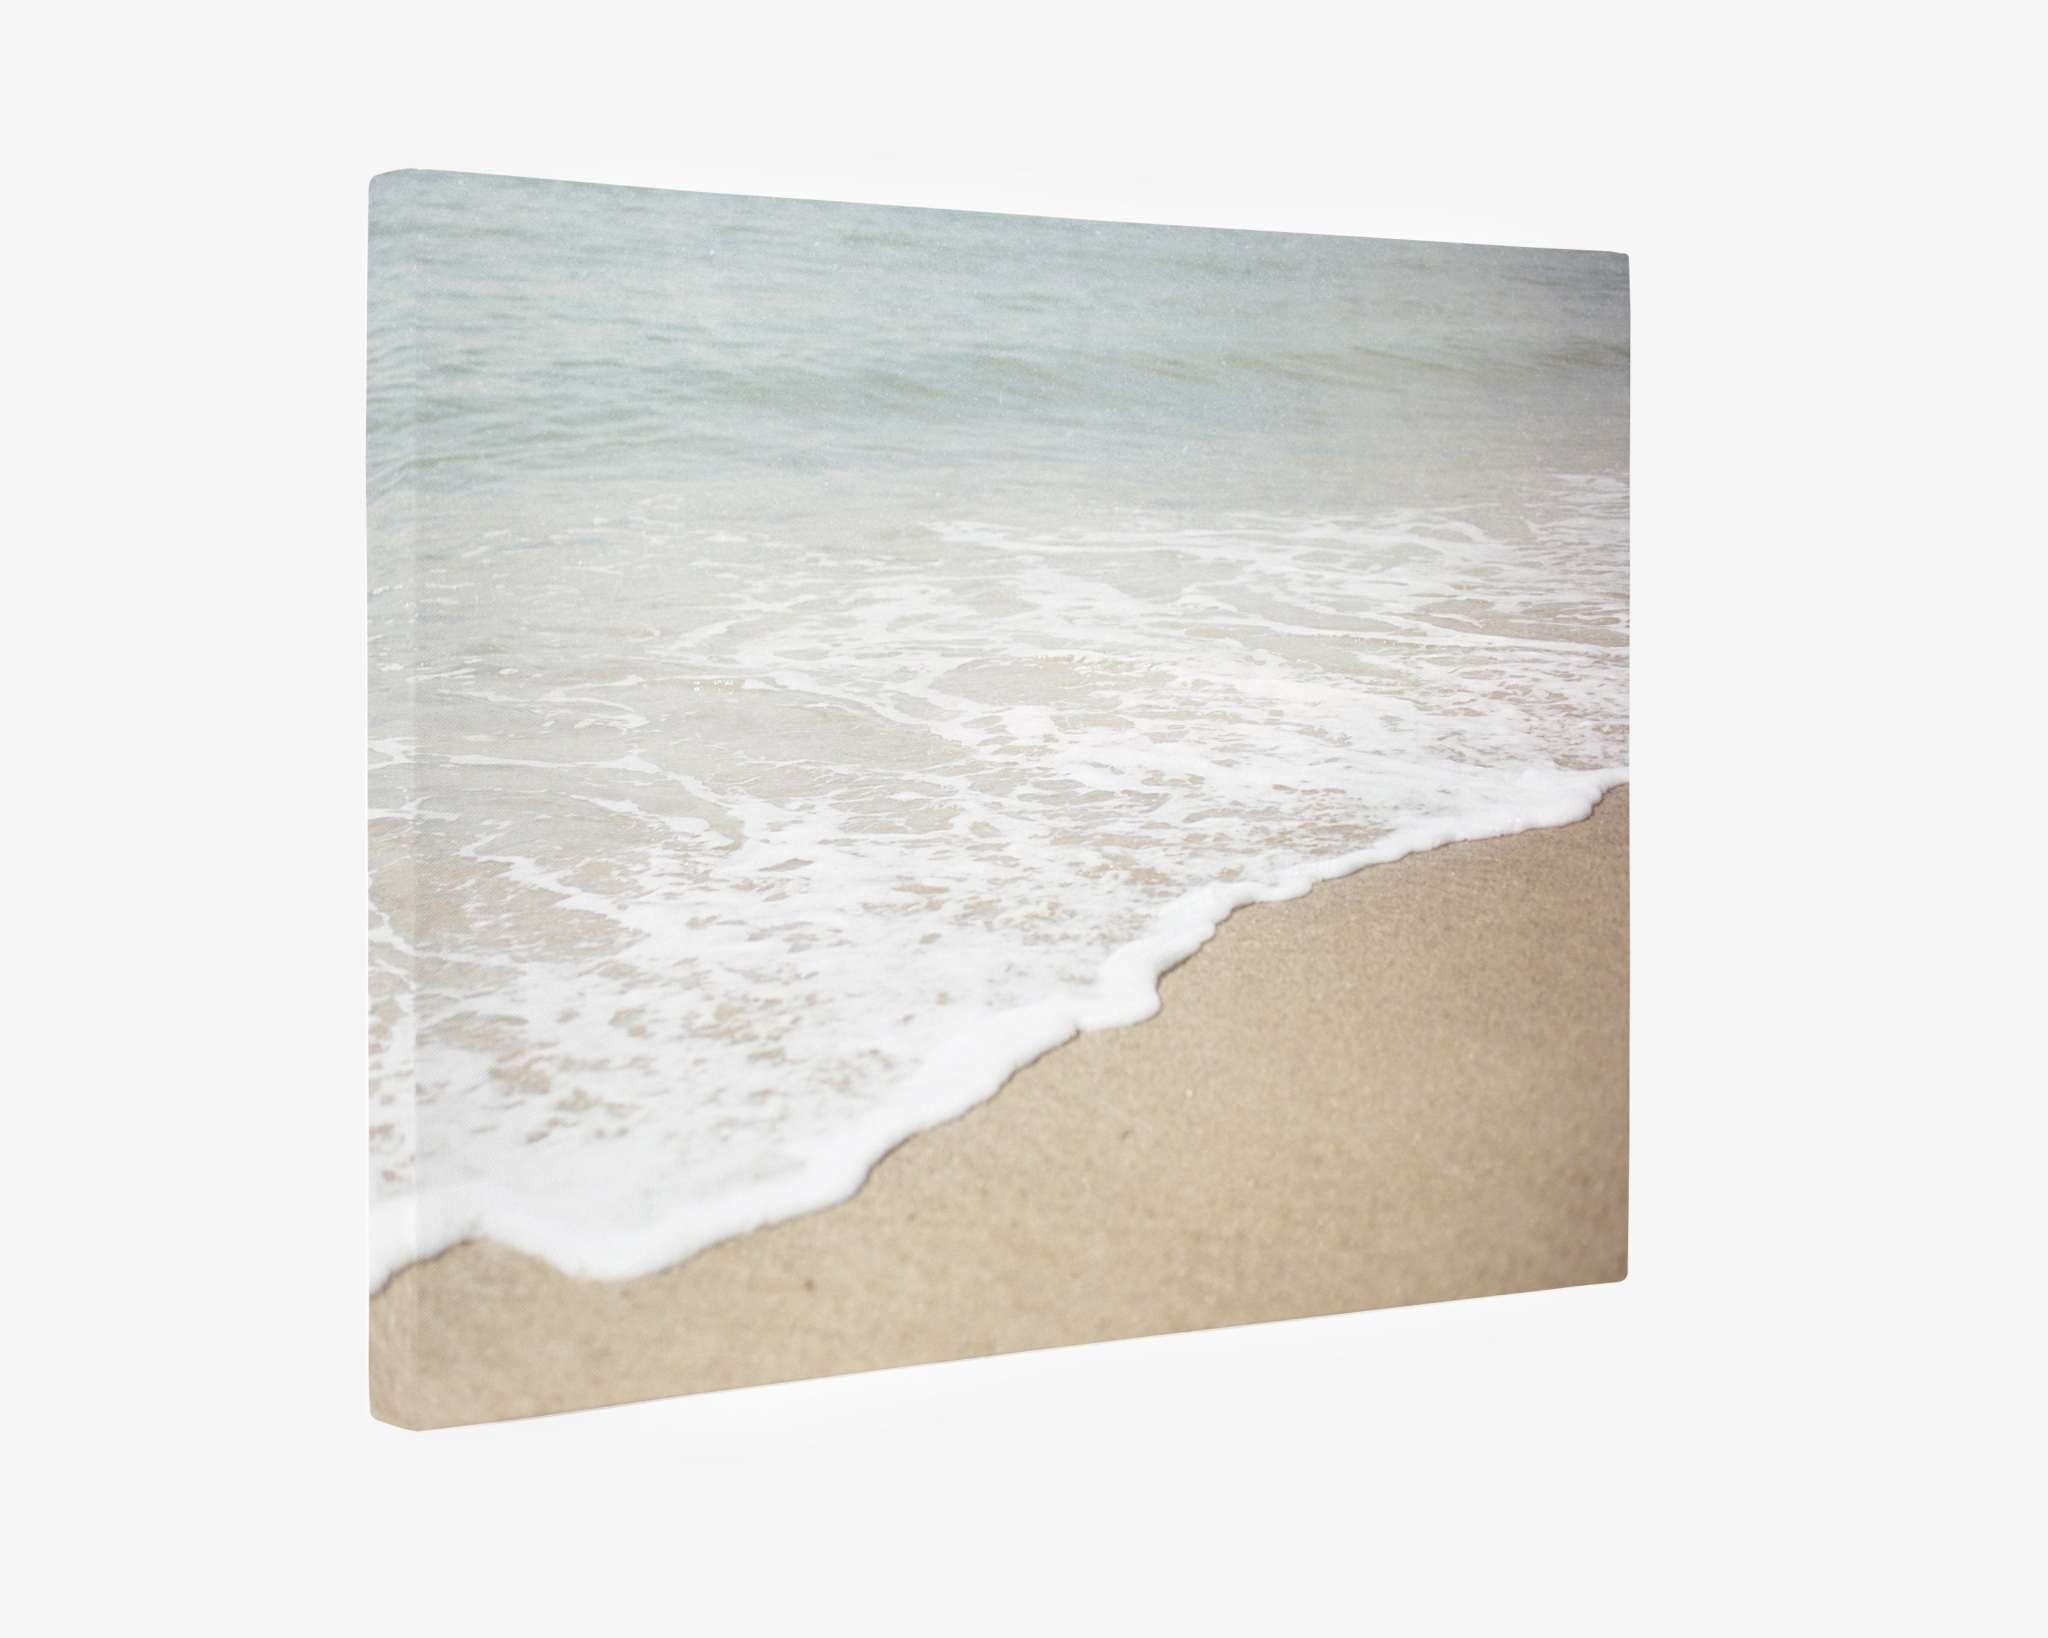 A minimalist artwork depicting gentle ocean waves lapping against the sandy shores of Will Rogers State Beach, mounted on a premium artist-grade canvas. The colors are soft and muted, creating a serene and calming visual effect. This is the Beach Waves Canvas Wall Art, 'Chasing Surf' by Offley Green.